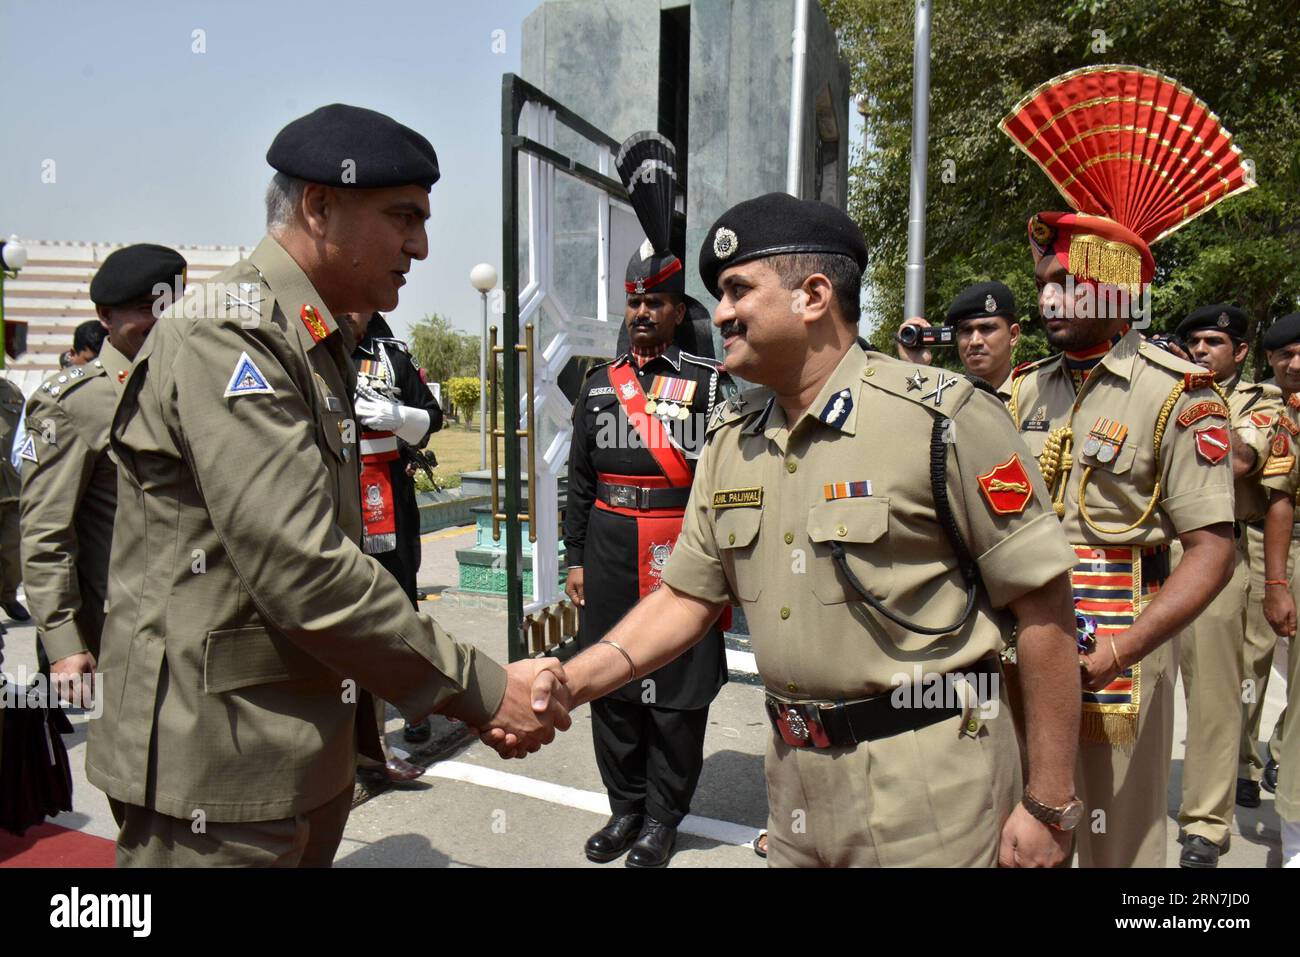 (150909) -- WAGAH, Sep. 9, 2015 -- Photo released by on Sept. 9, 2015 shows Director General, Maj. Gen. Umar Farooq Burki (L) shaking hands with Indian Border Security Force (BSF) Inspector General (IG) Anil Paliwal at Pakistan s side of Wagah border. A high-level delegation from Pakistan crossed over into India on Wednesday at the Attari-Wagah joint check post in the northwest state Punjab for director-level talks between border forces of both countries, said local media. (djj) PAKISTAN-WAGAH-INDIA-BORDER SITUATION TALKS PakistanxRangers PUBLICATIONxNOTxINxCHN   150909 Wagah Sep 9 2015 Photo Stock Photo